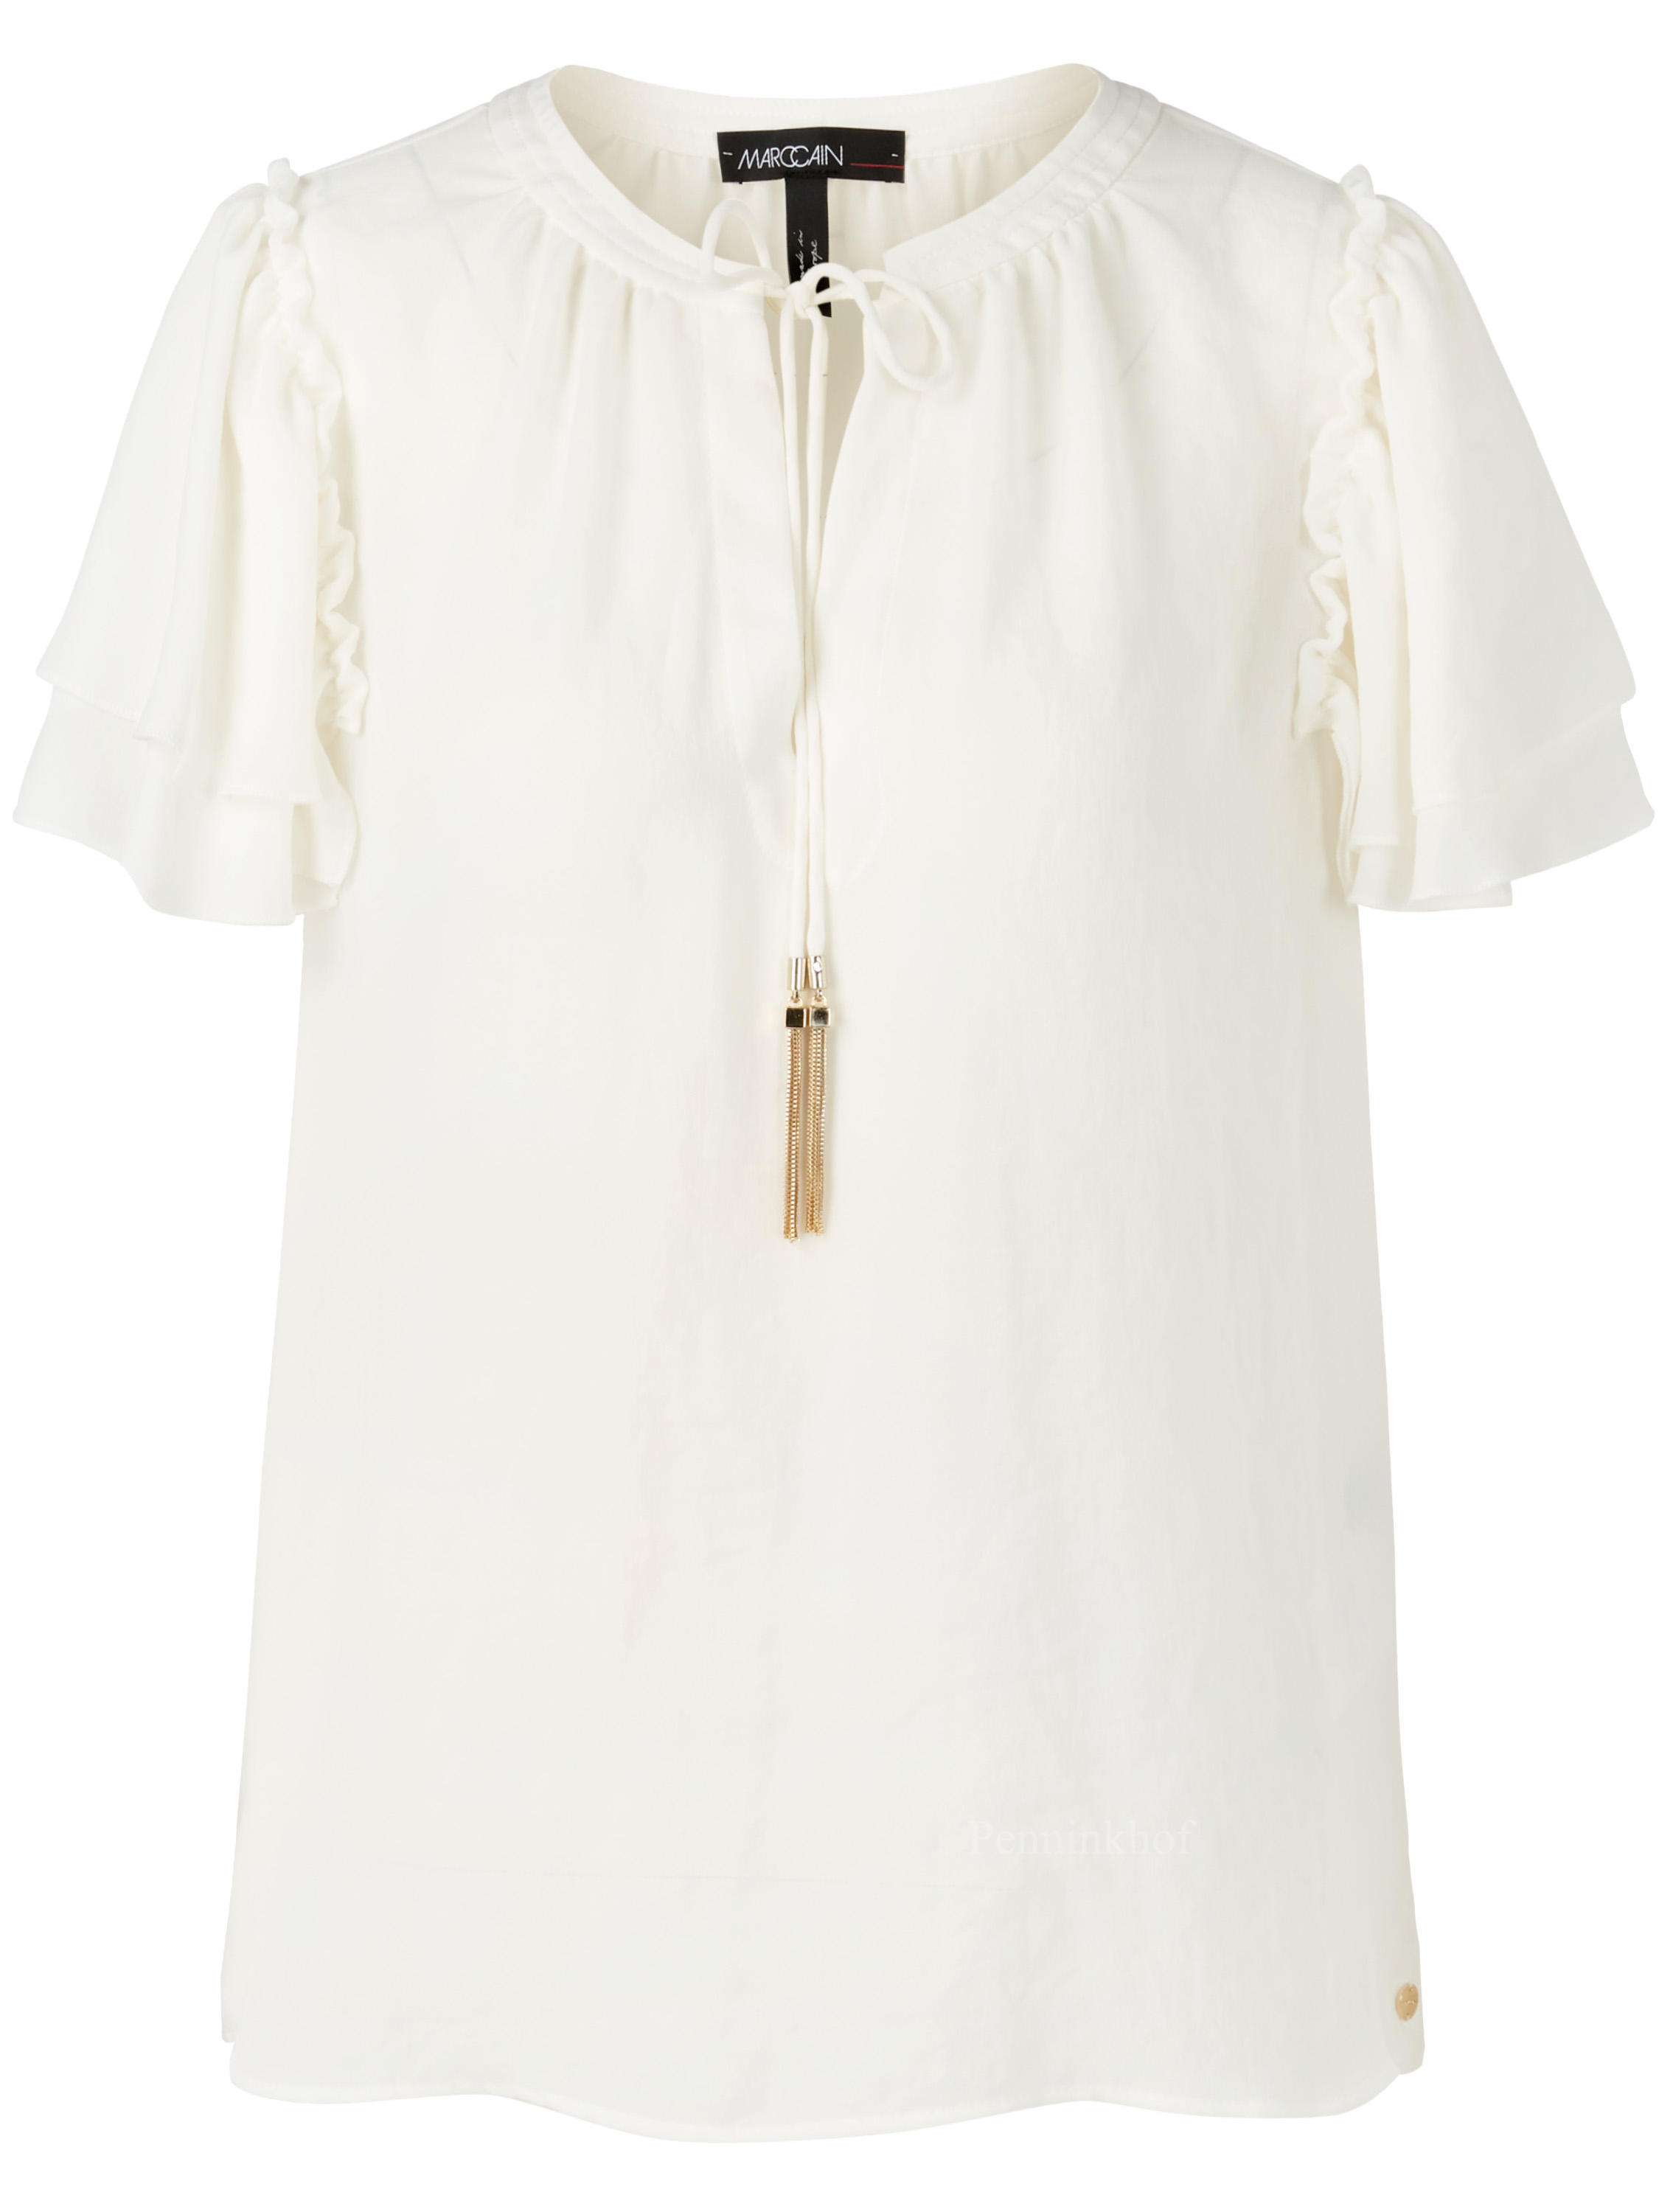 Marc Cain blouses UC 55.19 W30 Cream White by